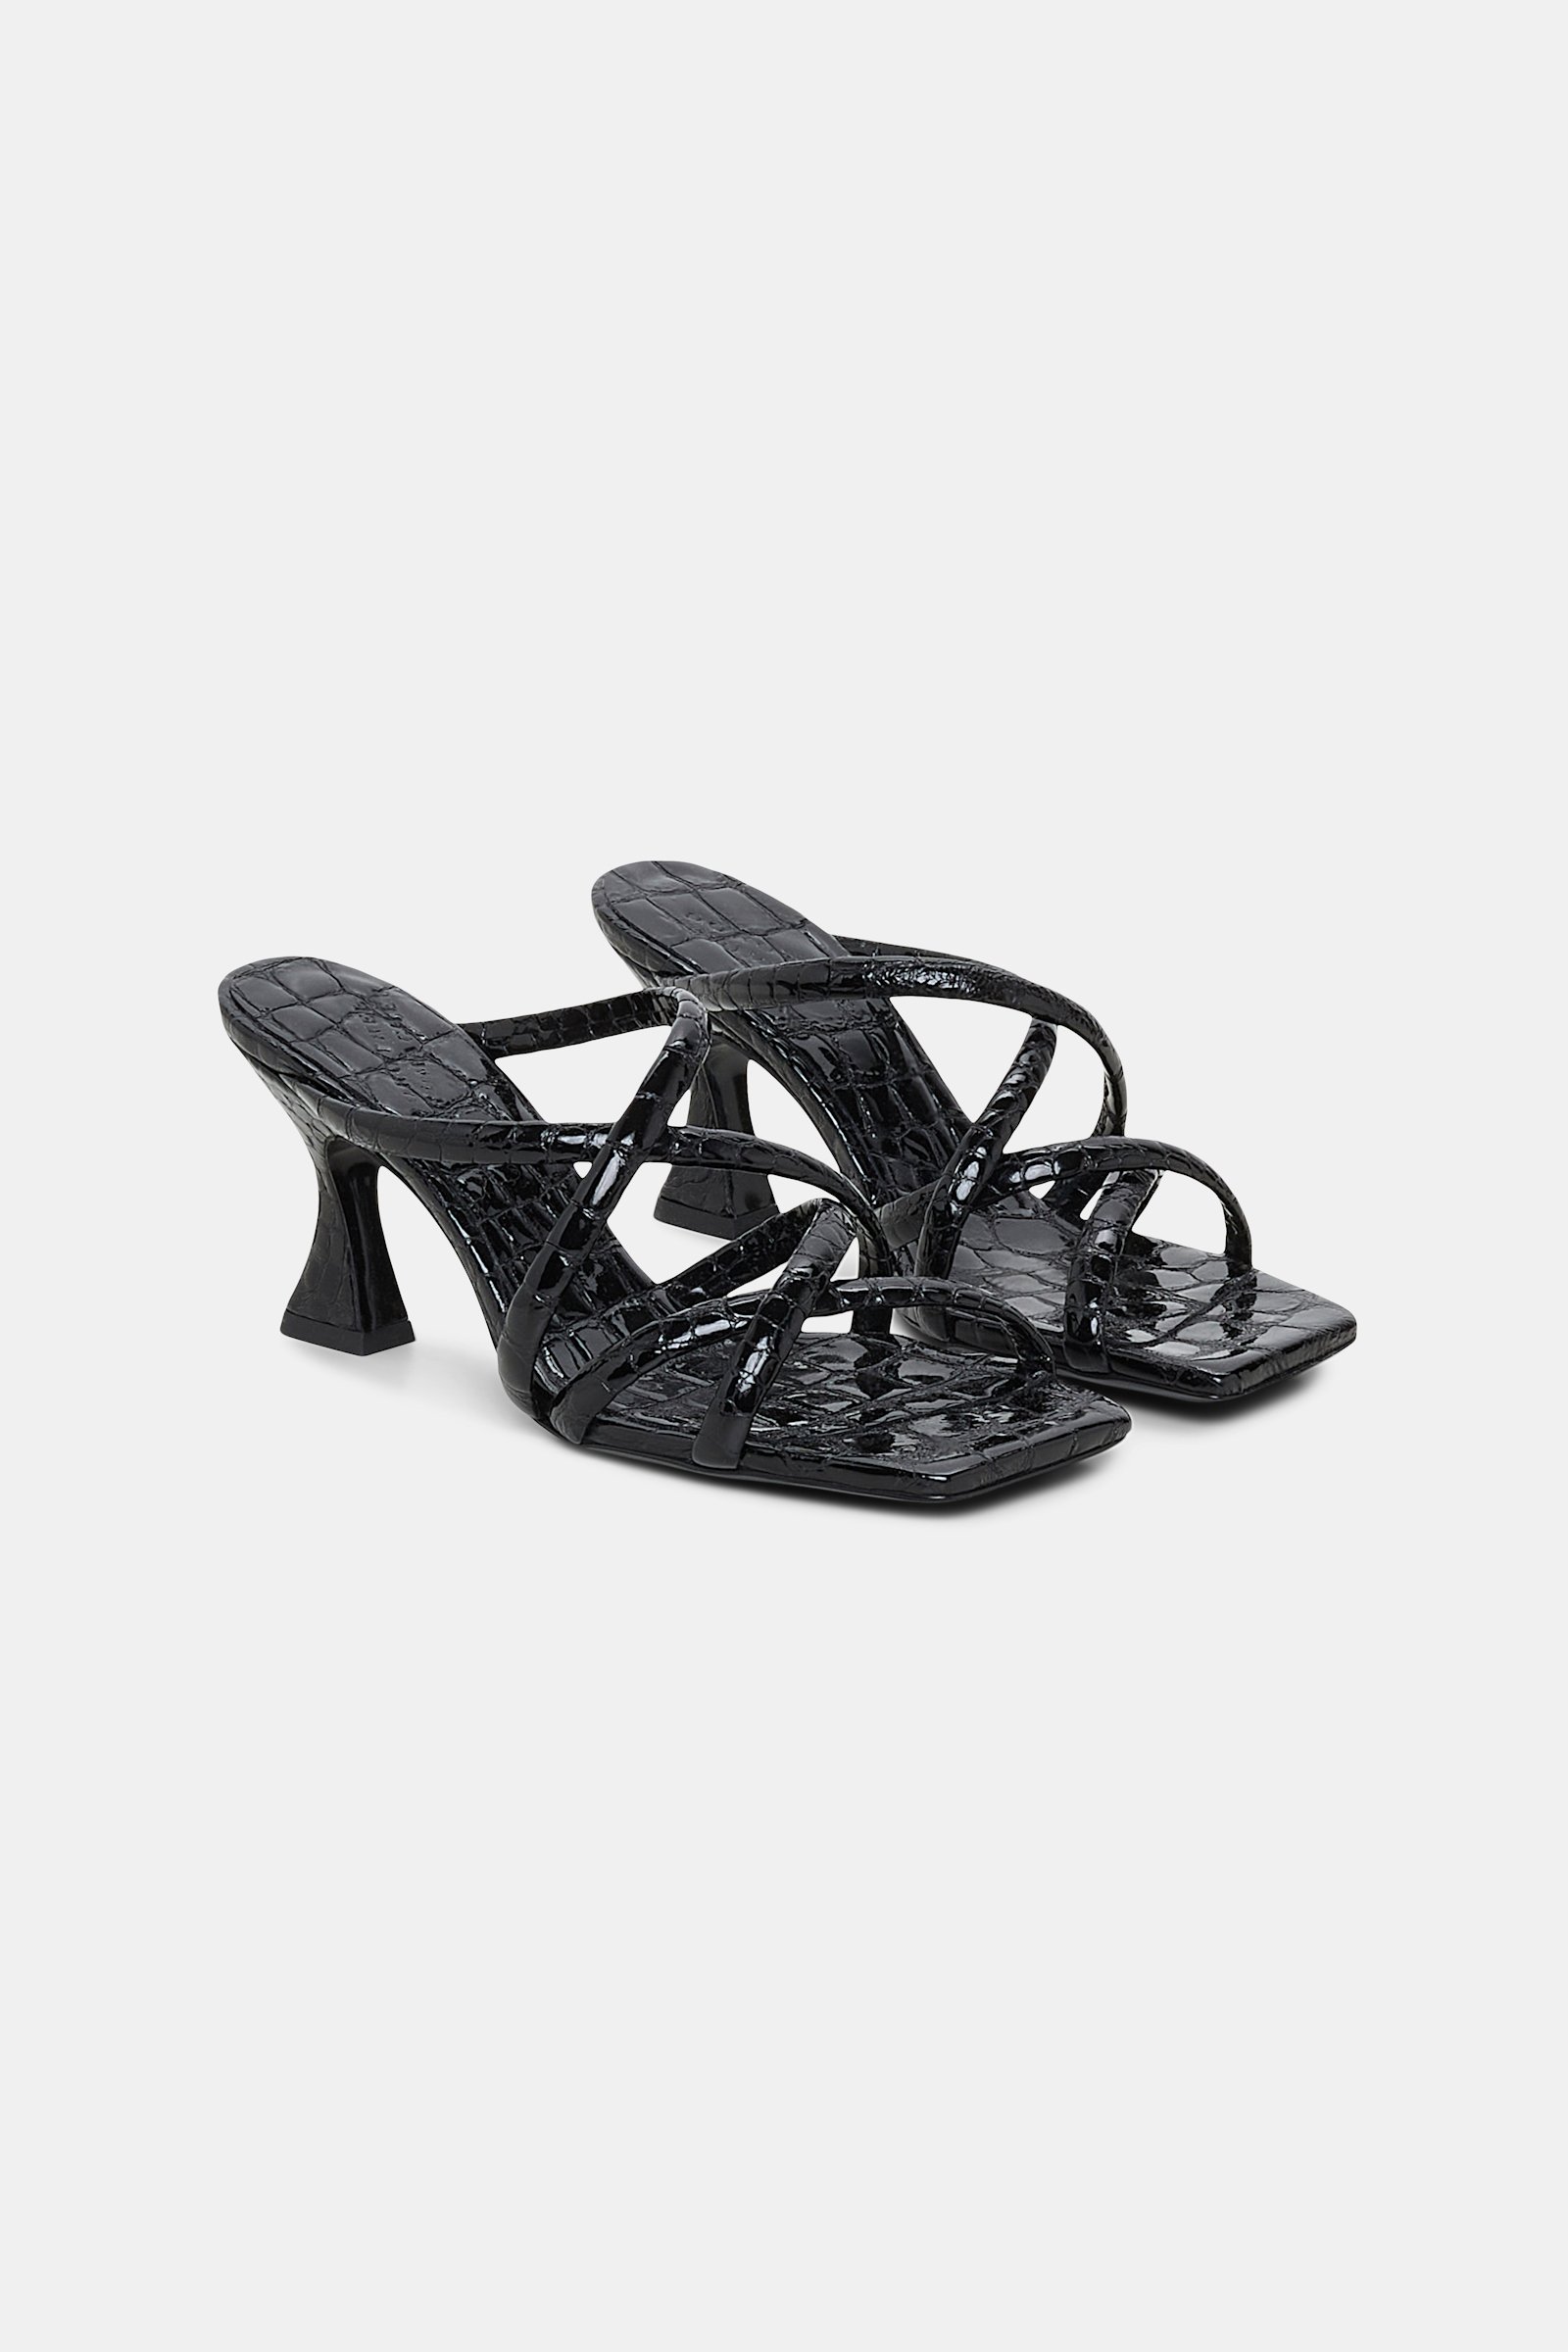 Dorothee Schumacher Square toe flared heel strappy sandals pure black